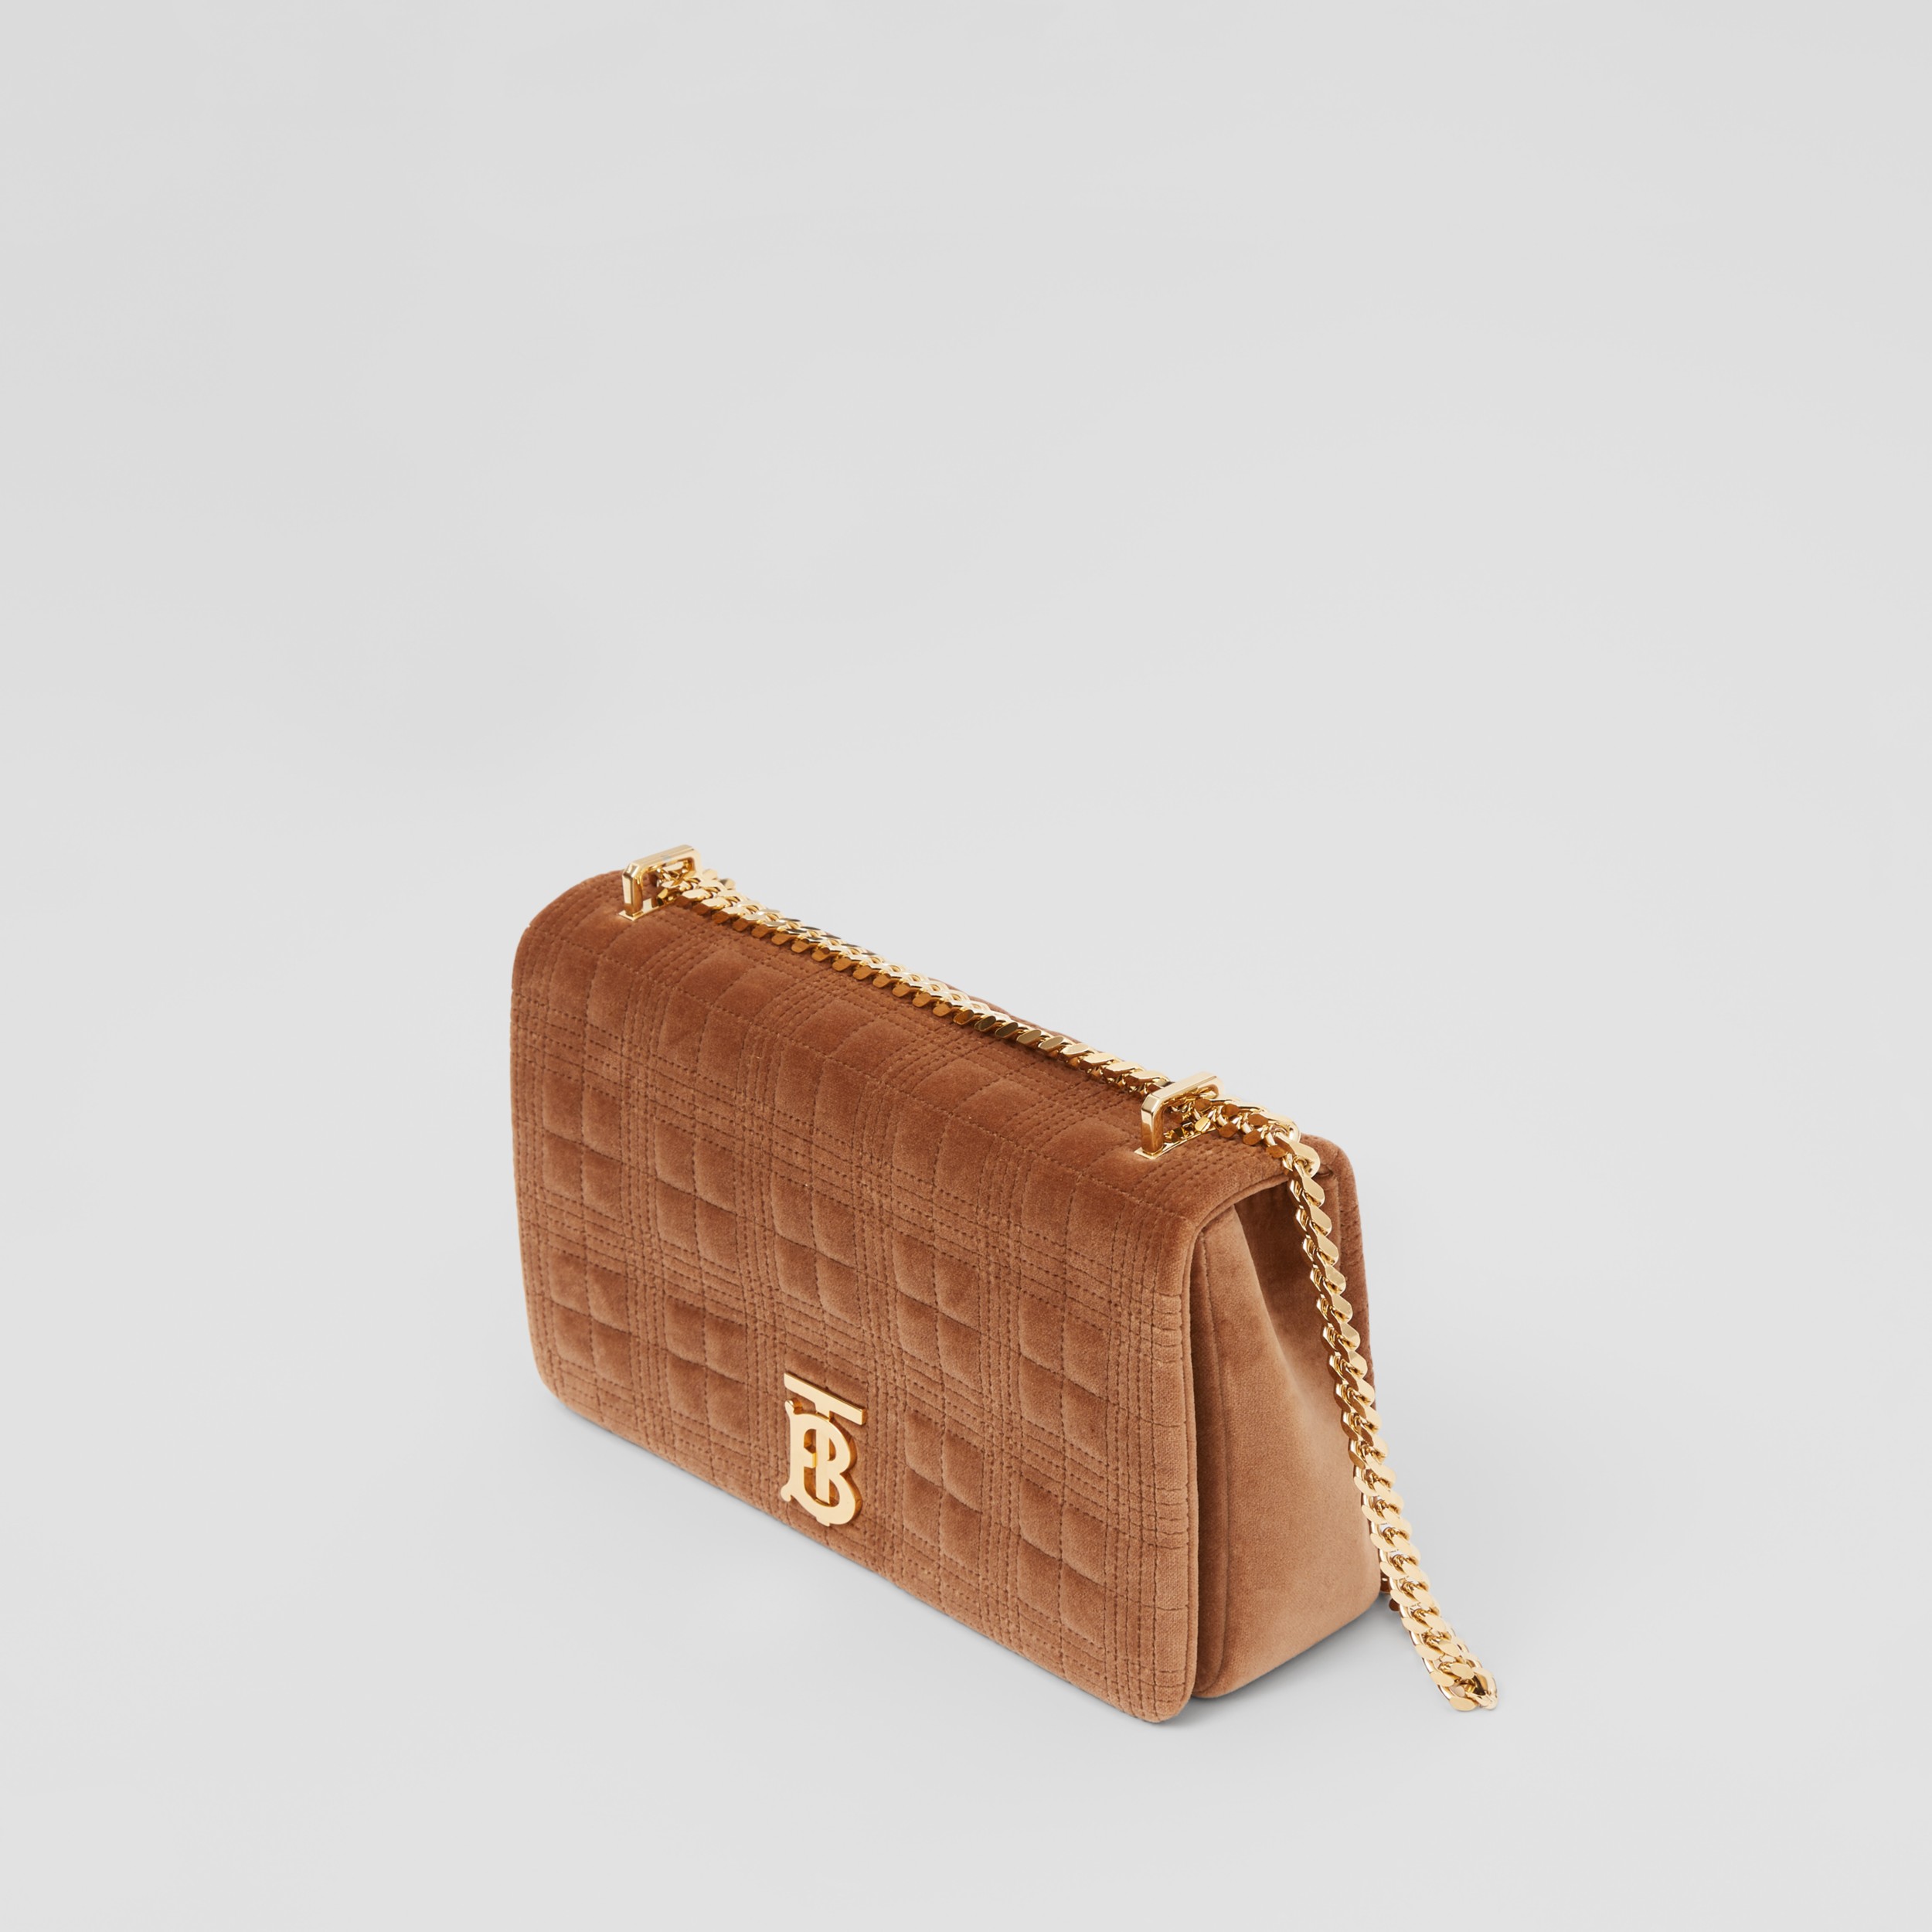 Medium Quilted Velvet Lola Bag in Fawn - Women | Burberry United States